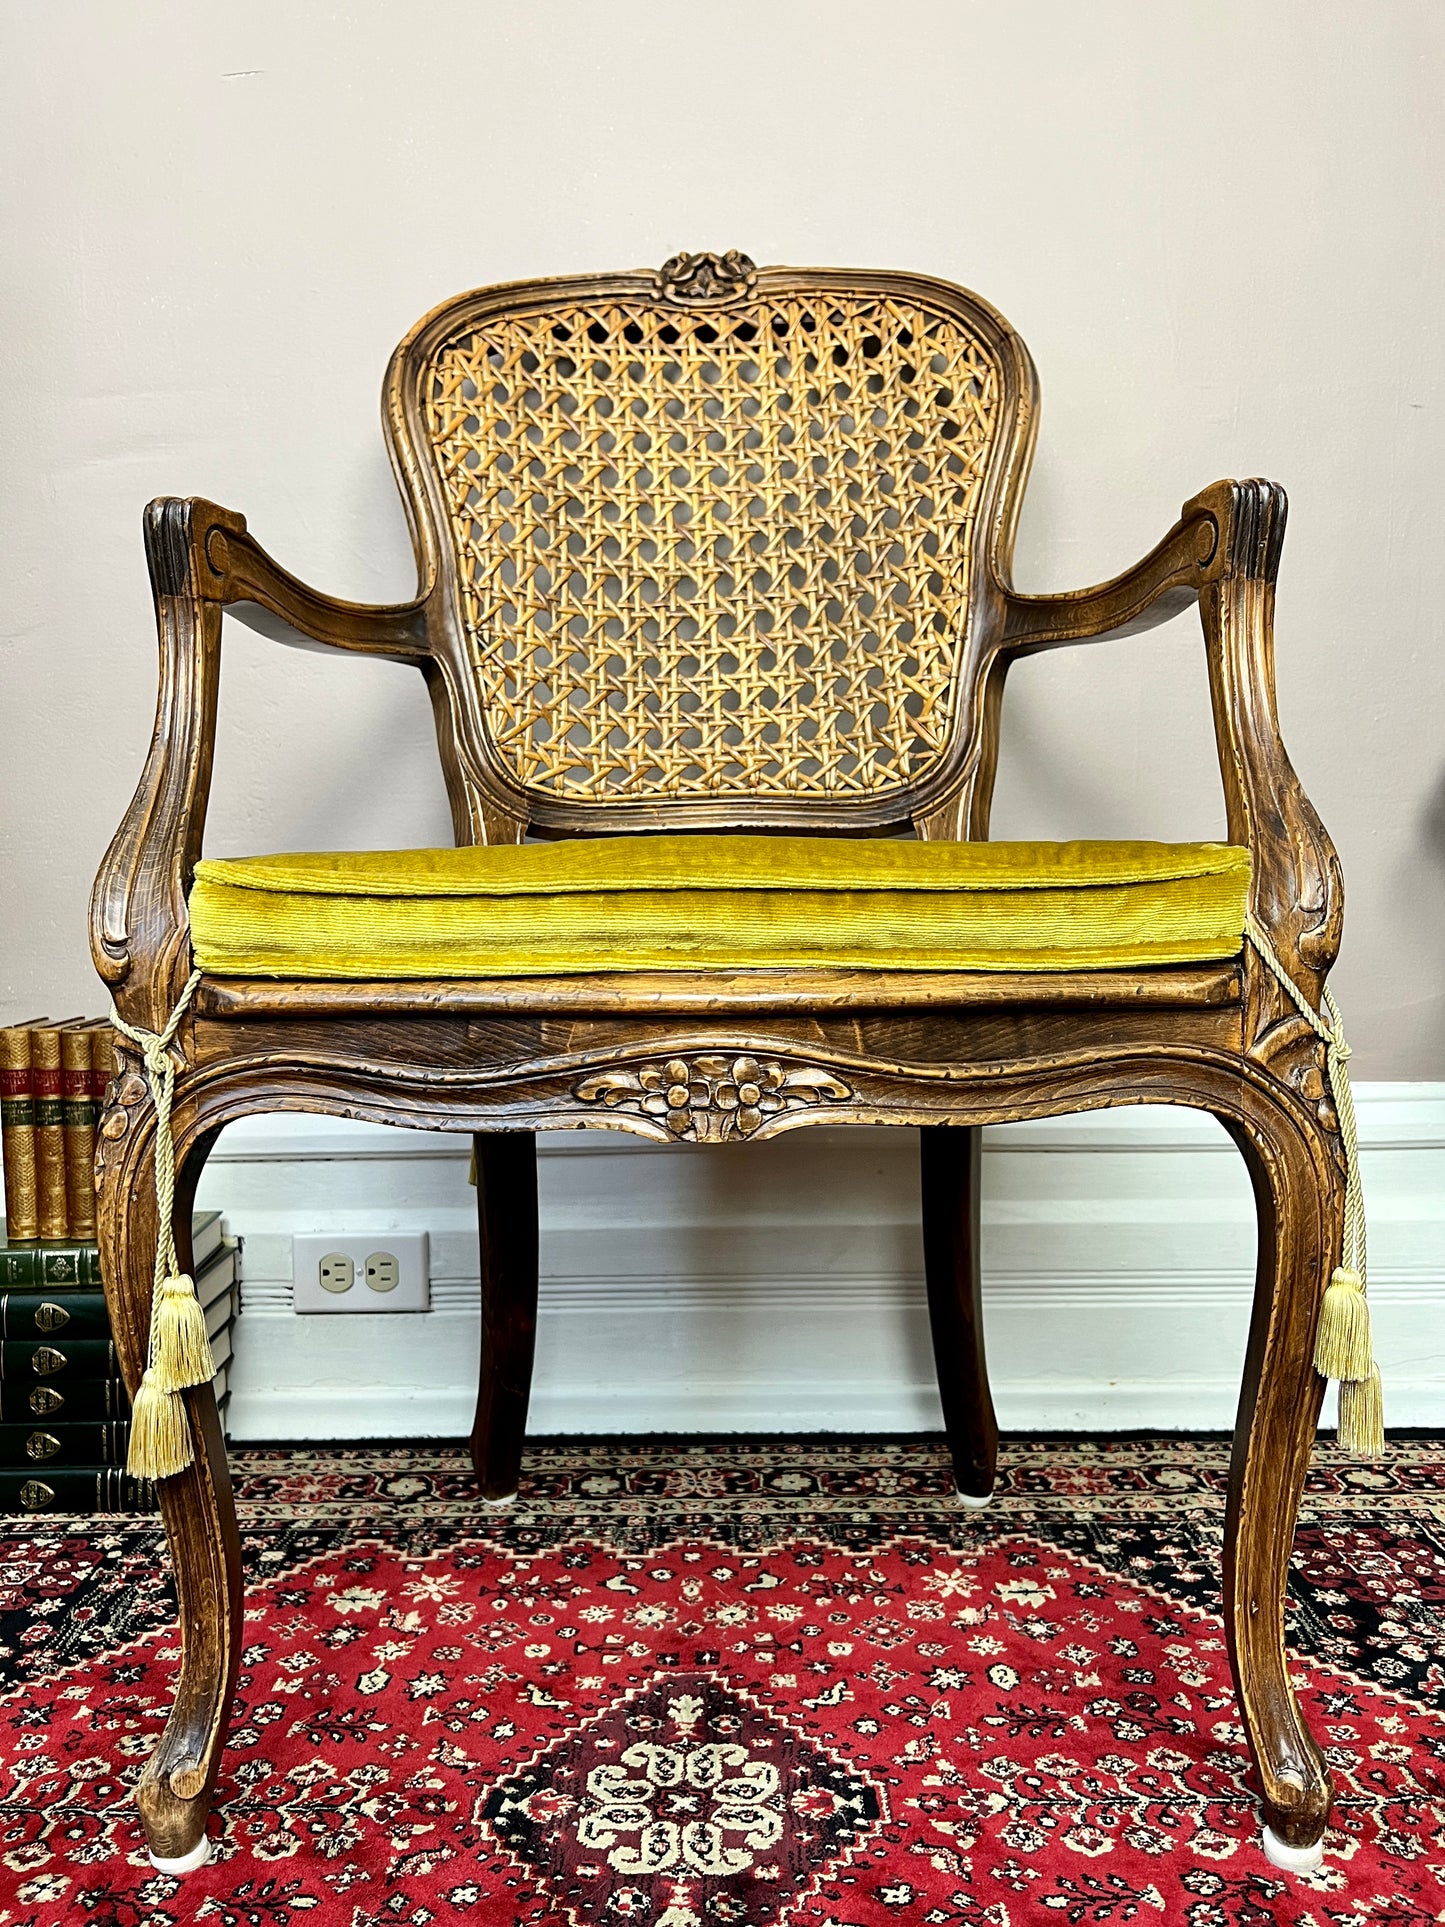 The Beatrice Chair